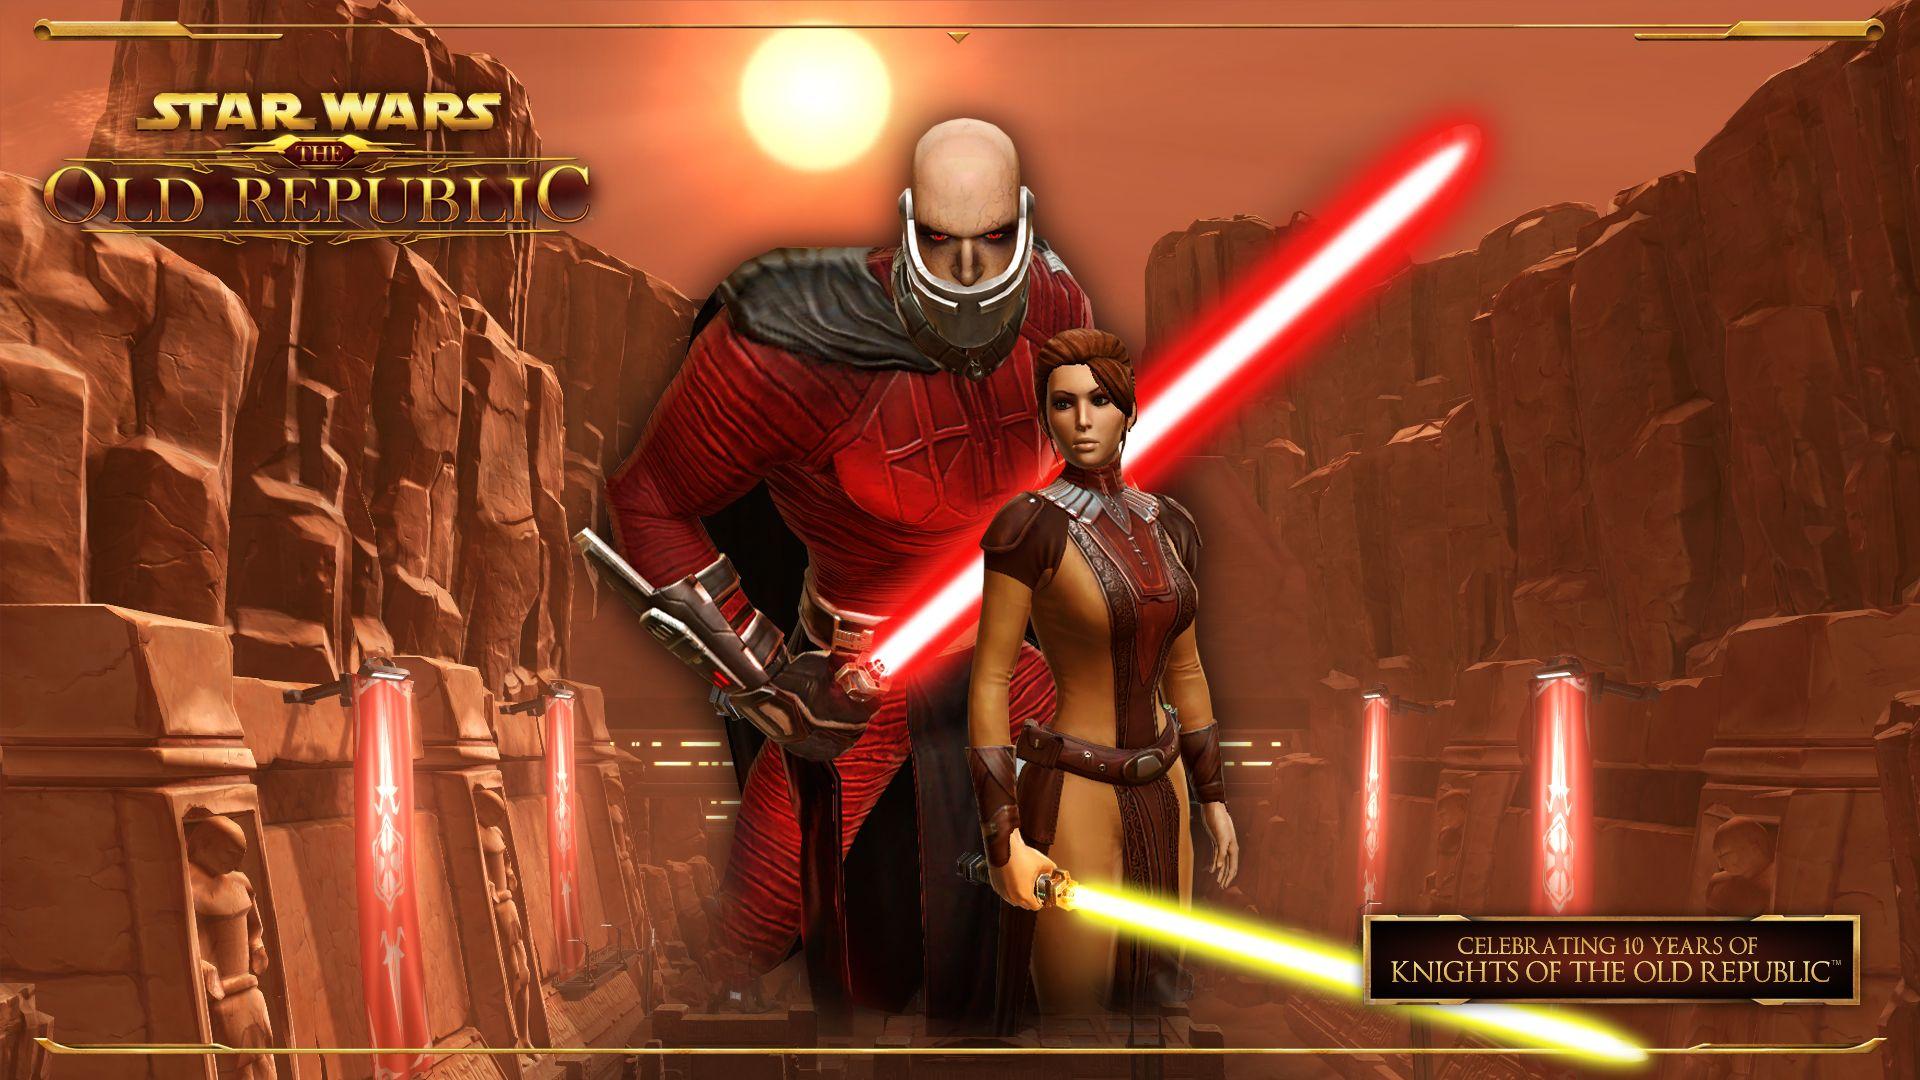 KOTOR is 10 Years Old- SWTOR and Bioware Celebrate